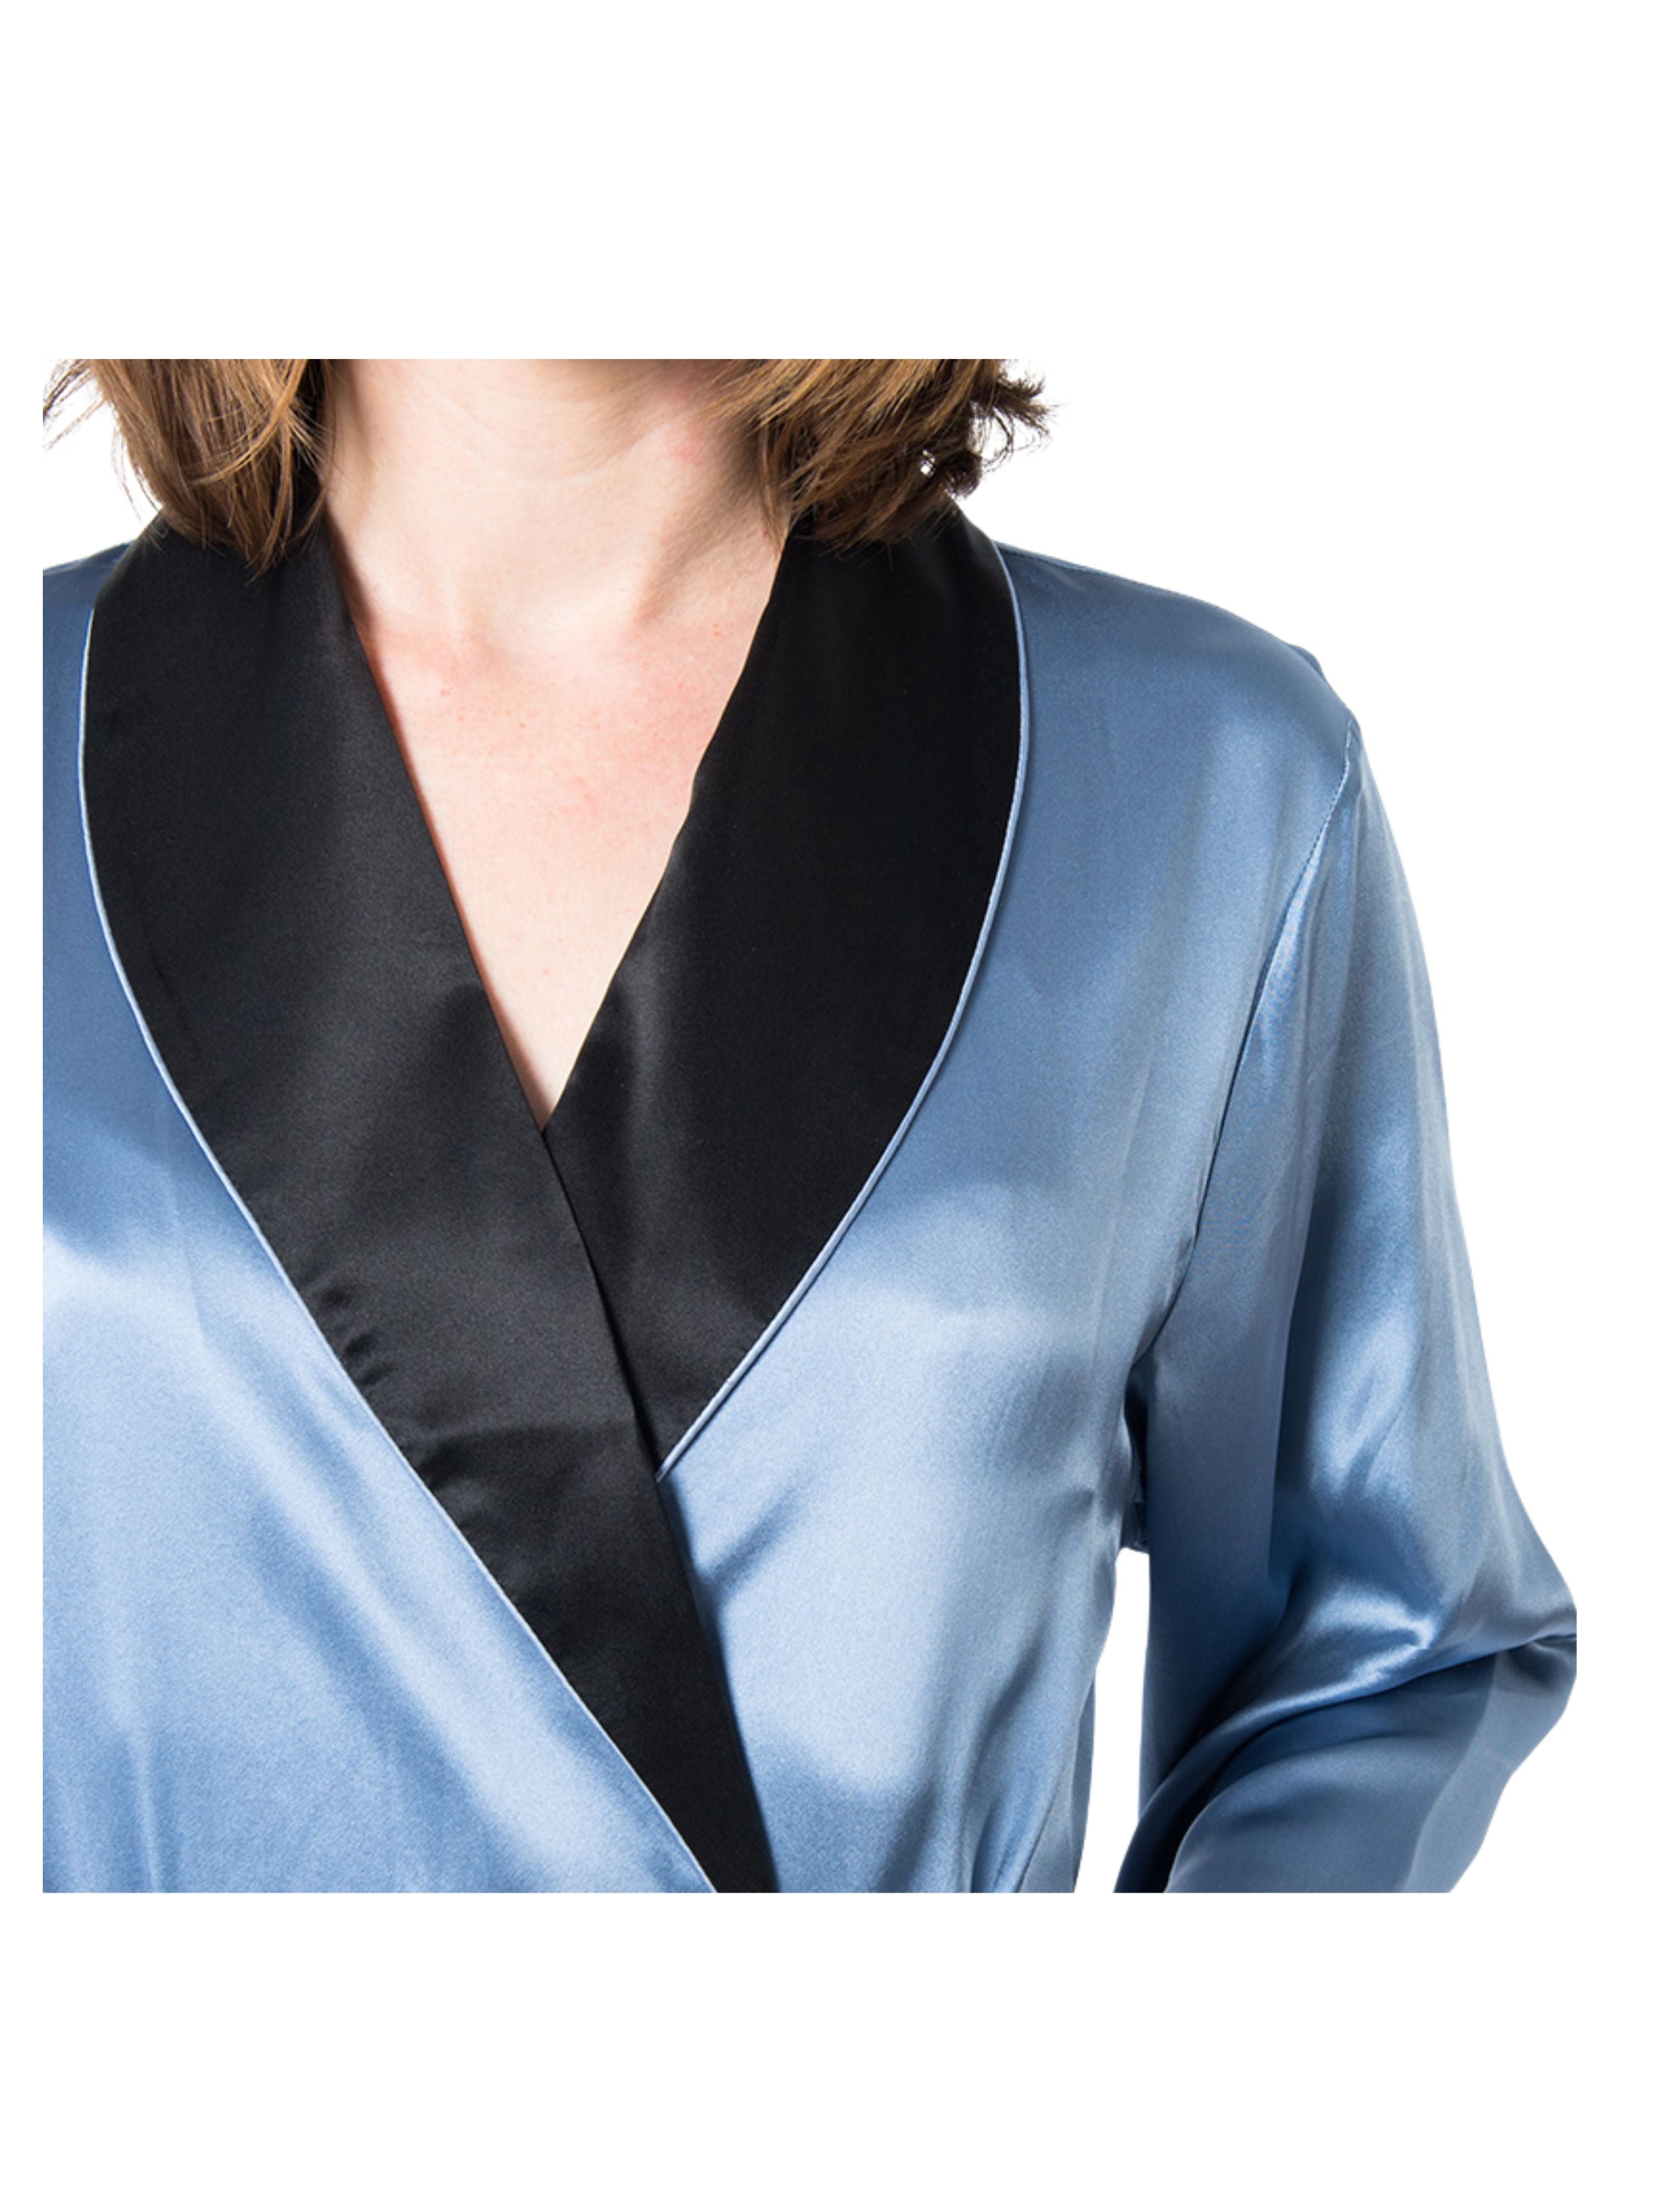  Women's Twilight Robe with Black Collar - Women's Twilight Robe with Black Collar -  -  - Luxurious Fine Silk by Forsters Finery